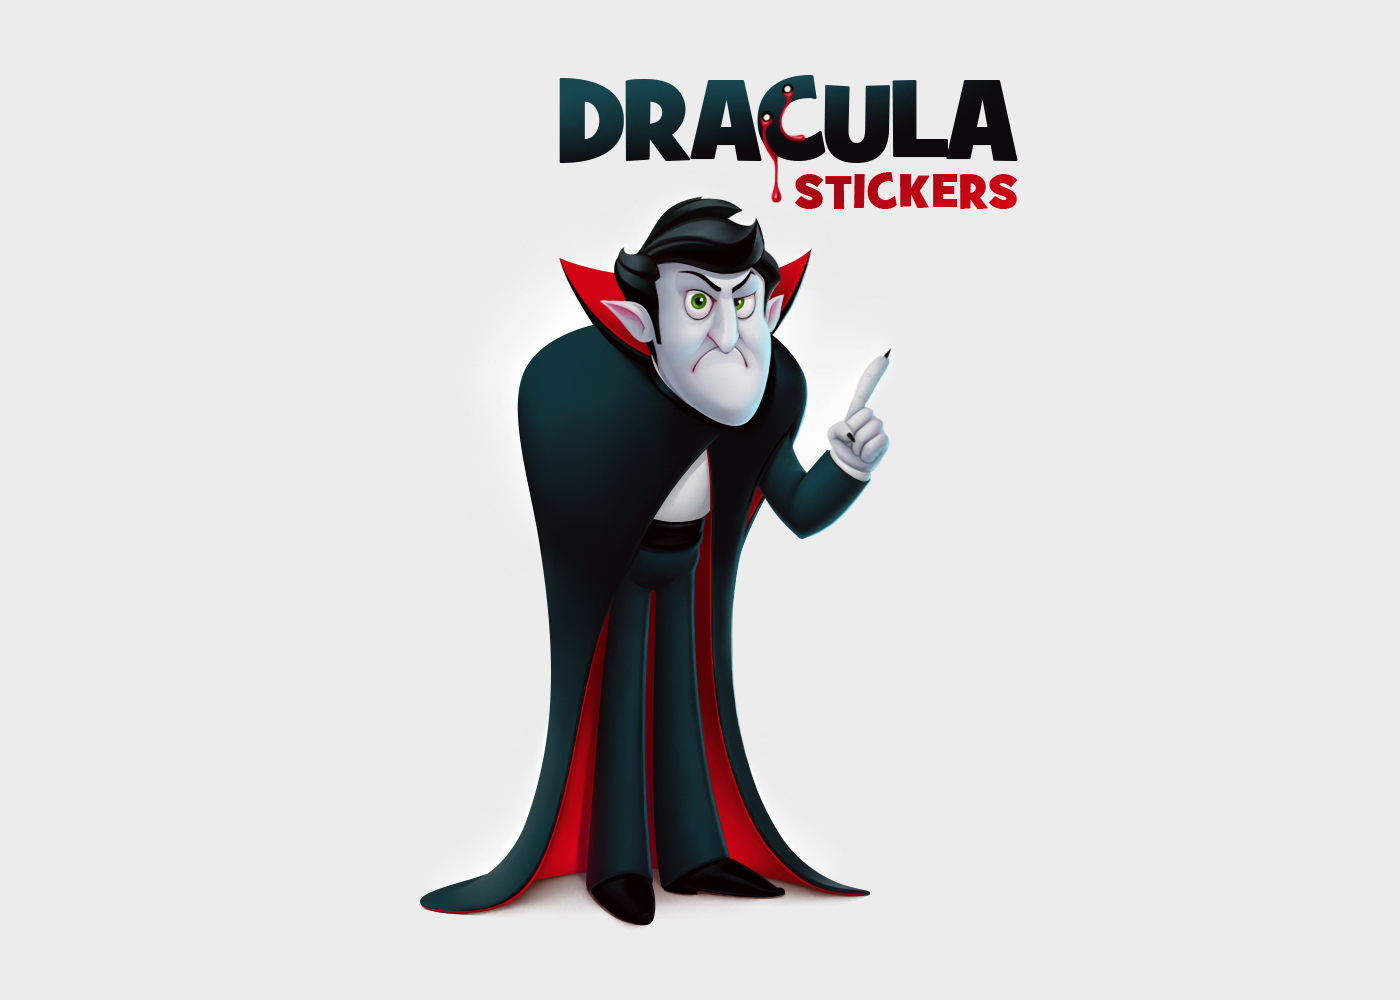 stickers Character design social network gangster dragon vampire dracula blood machine